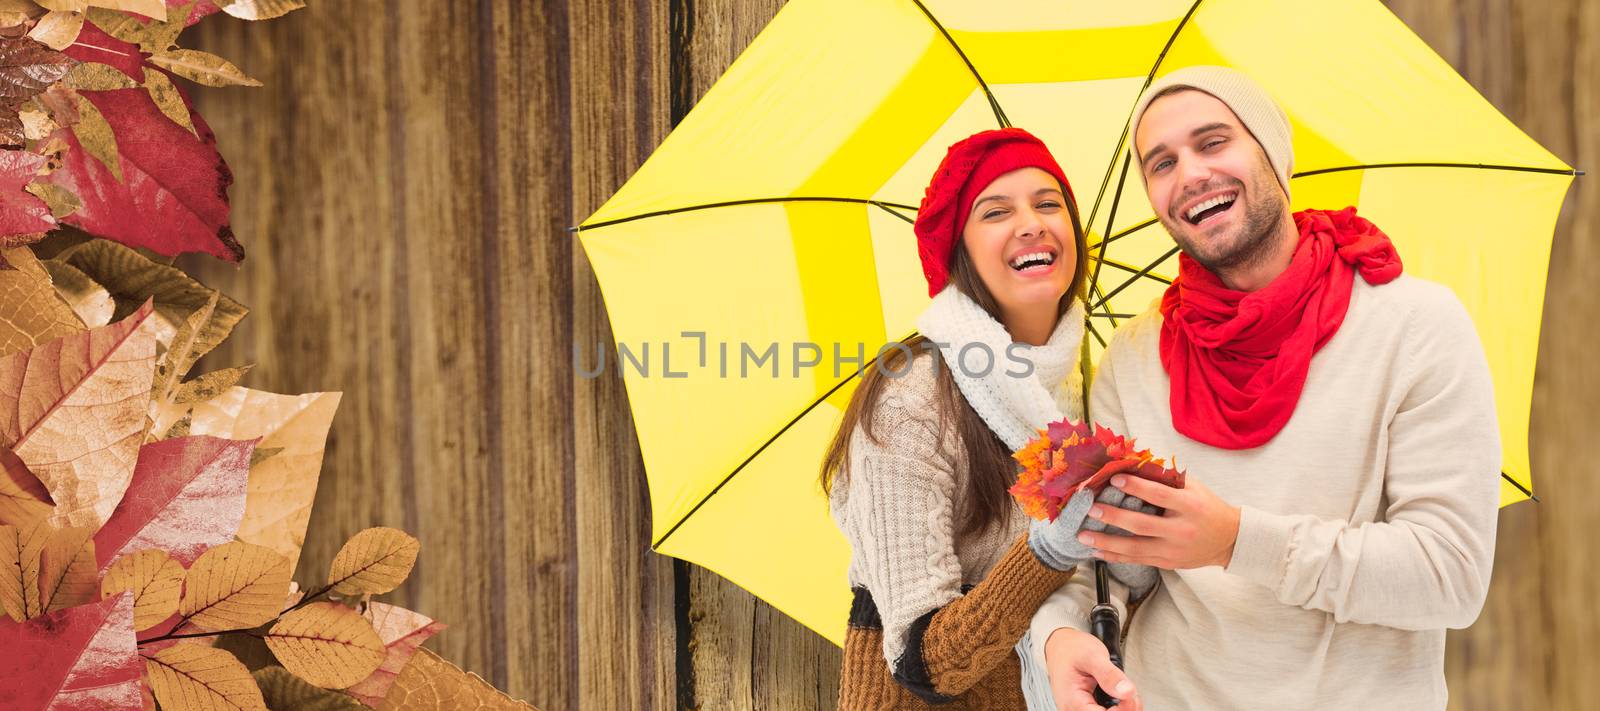 Autumn couple holding umbrella against close-up of wooden plank